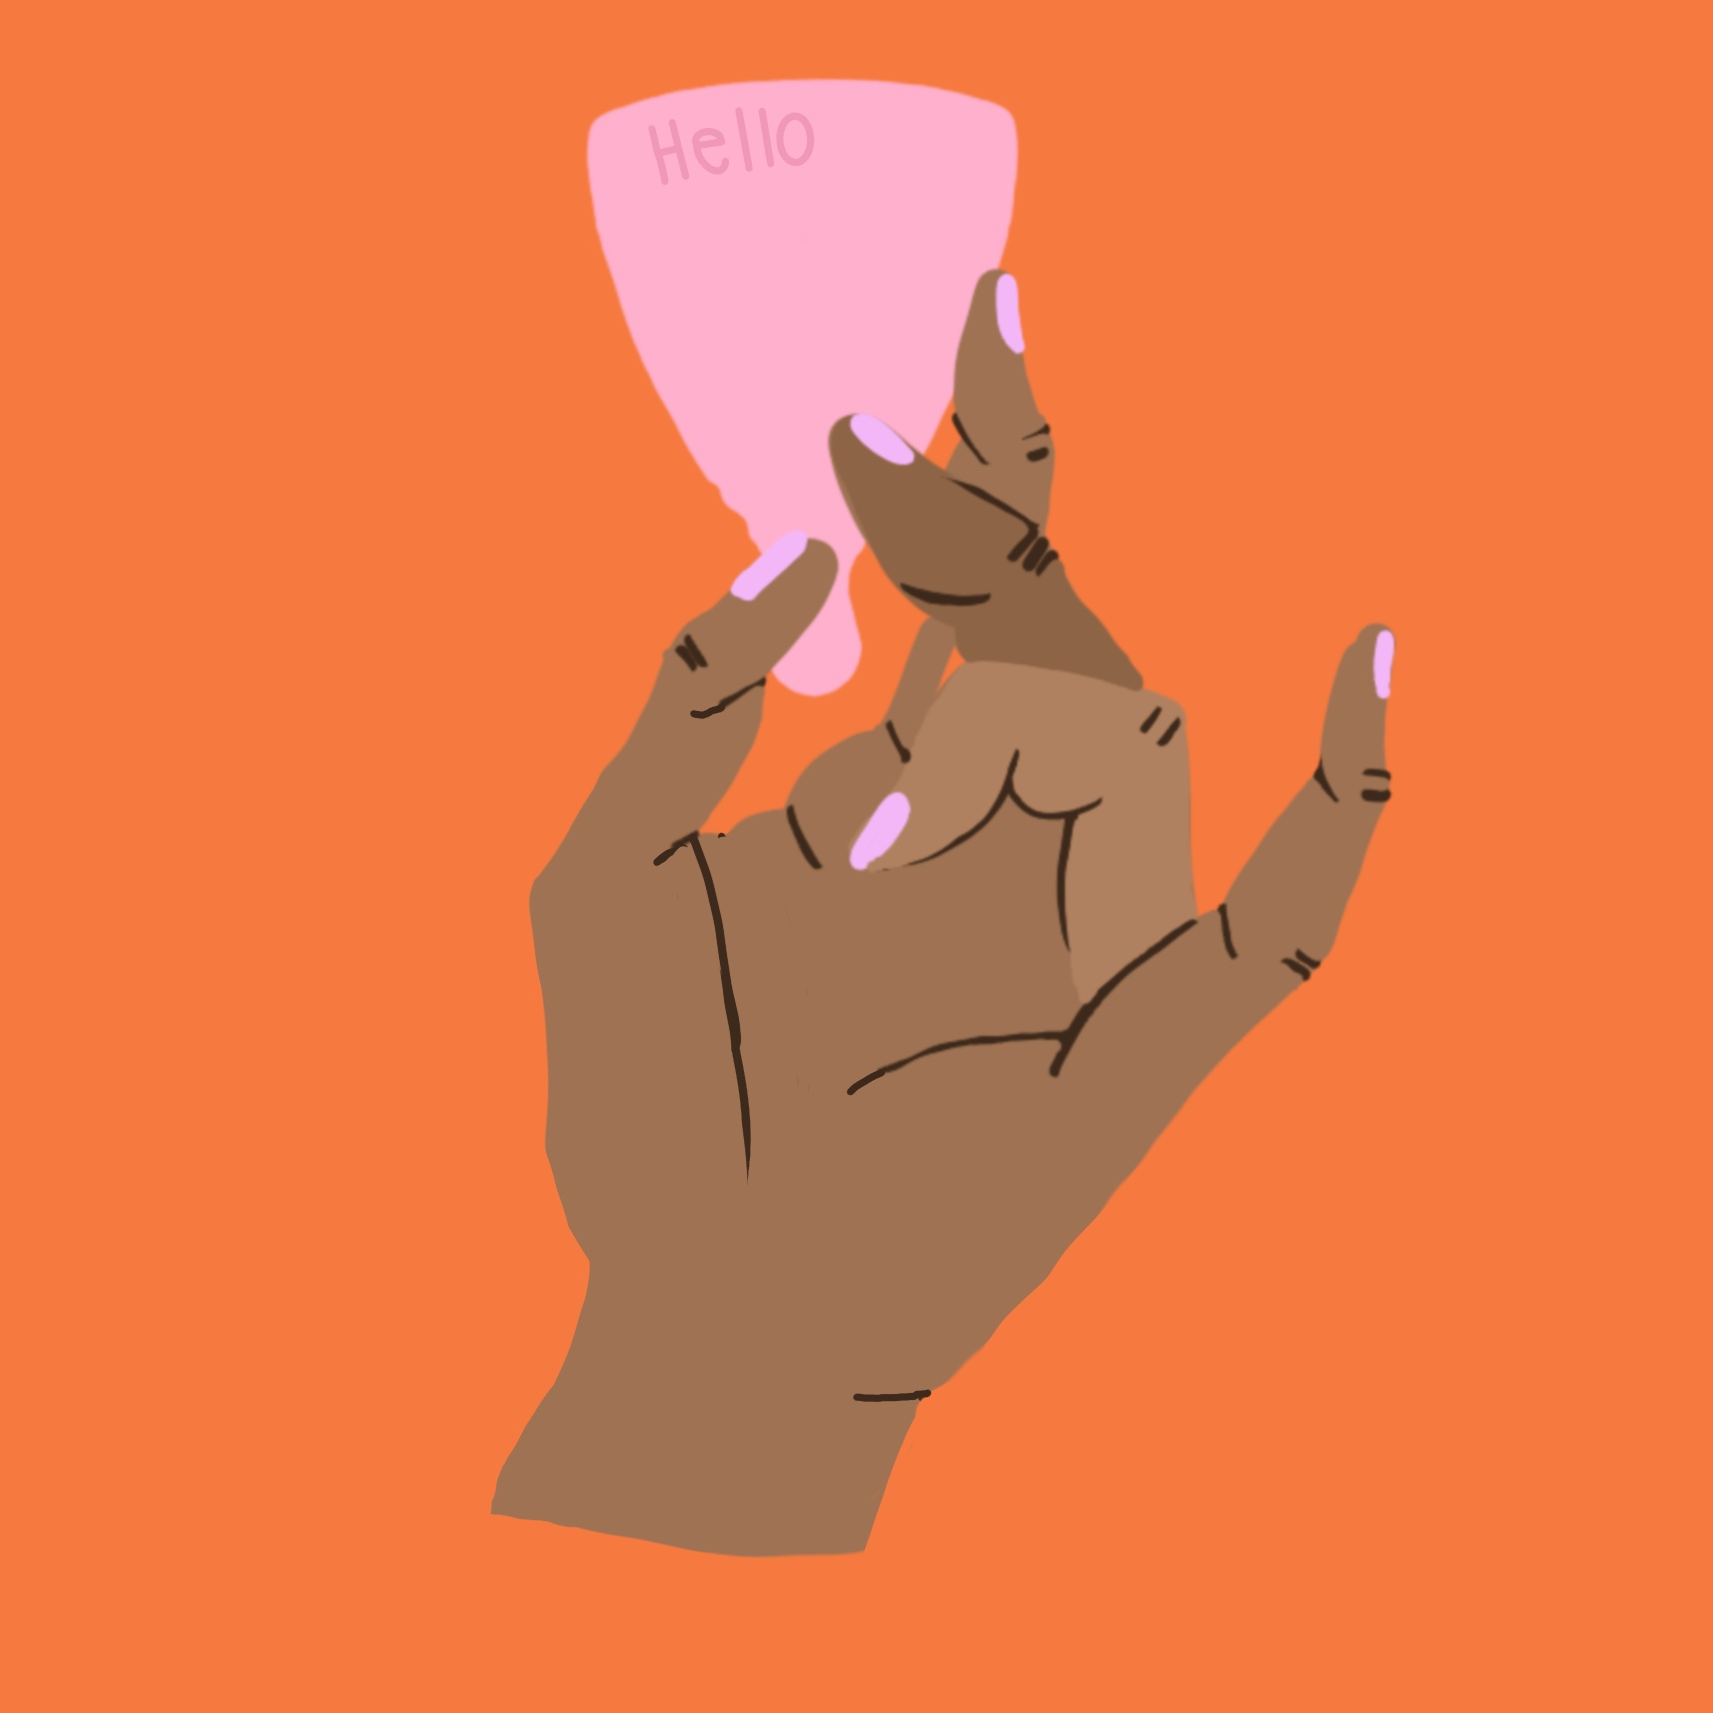 Hello's Guide on Caring For Your Menstrual Cup